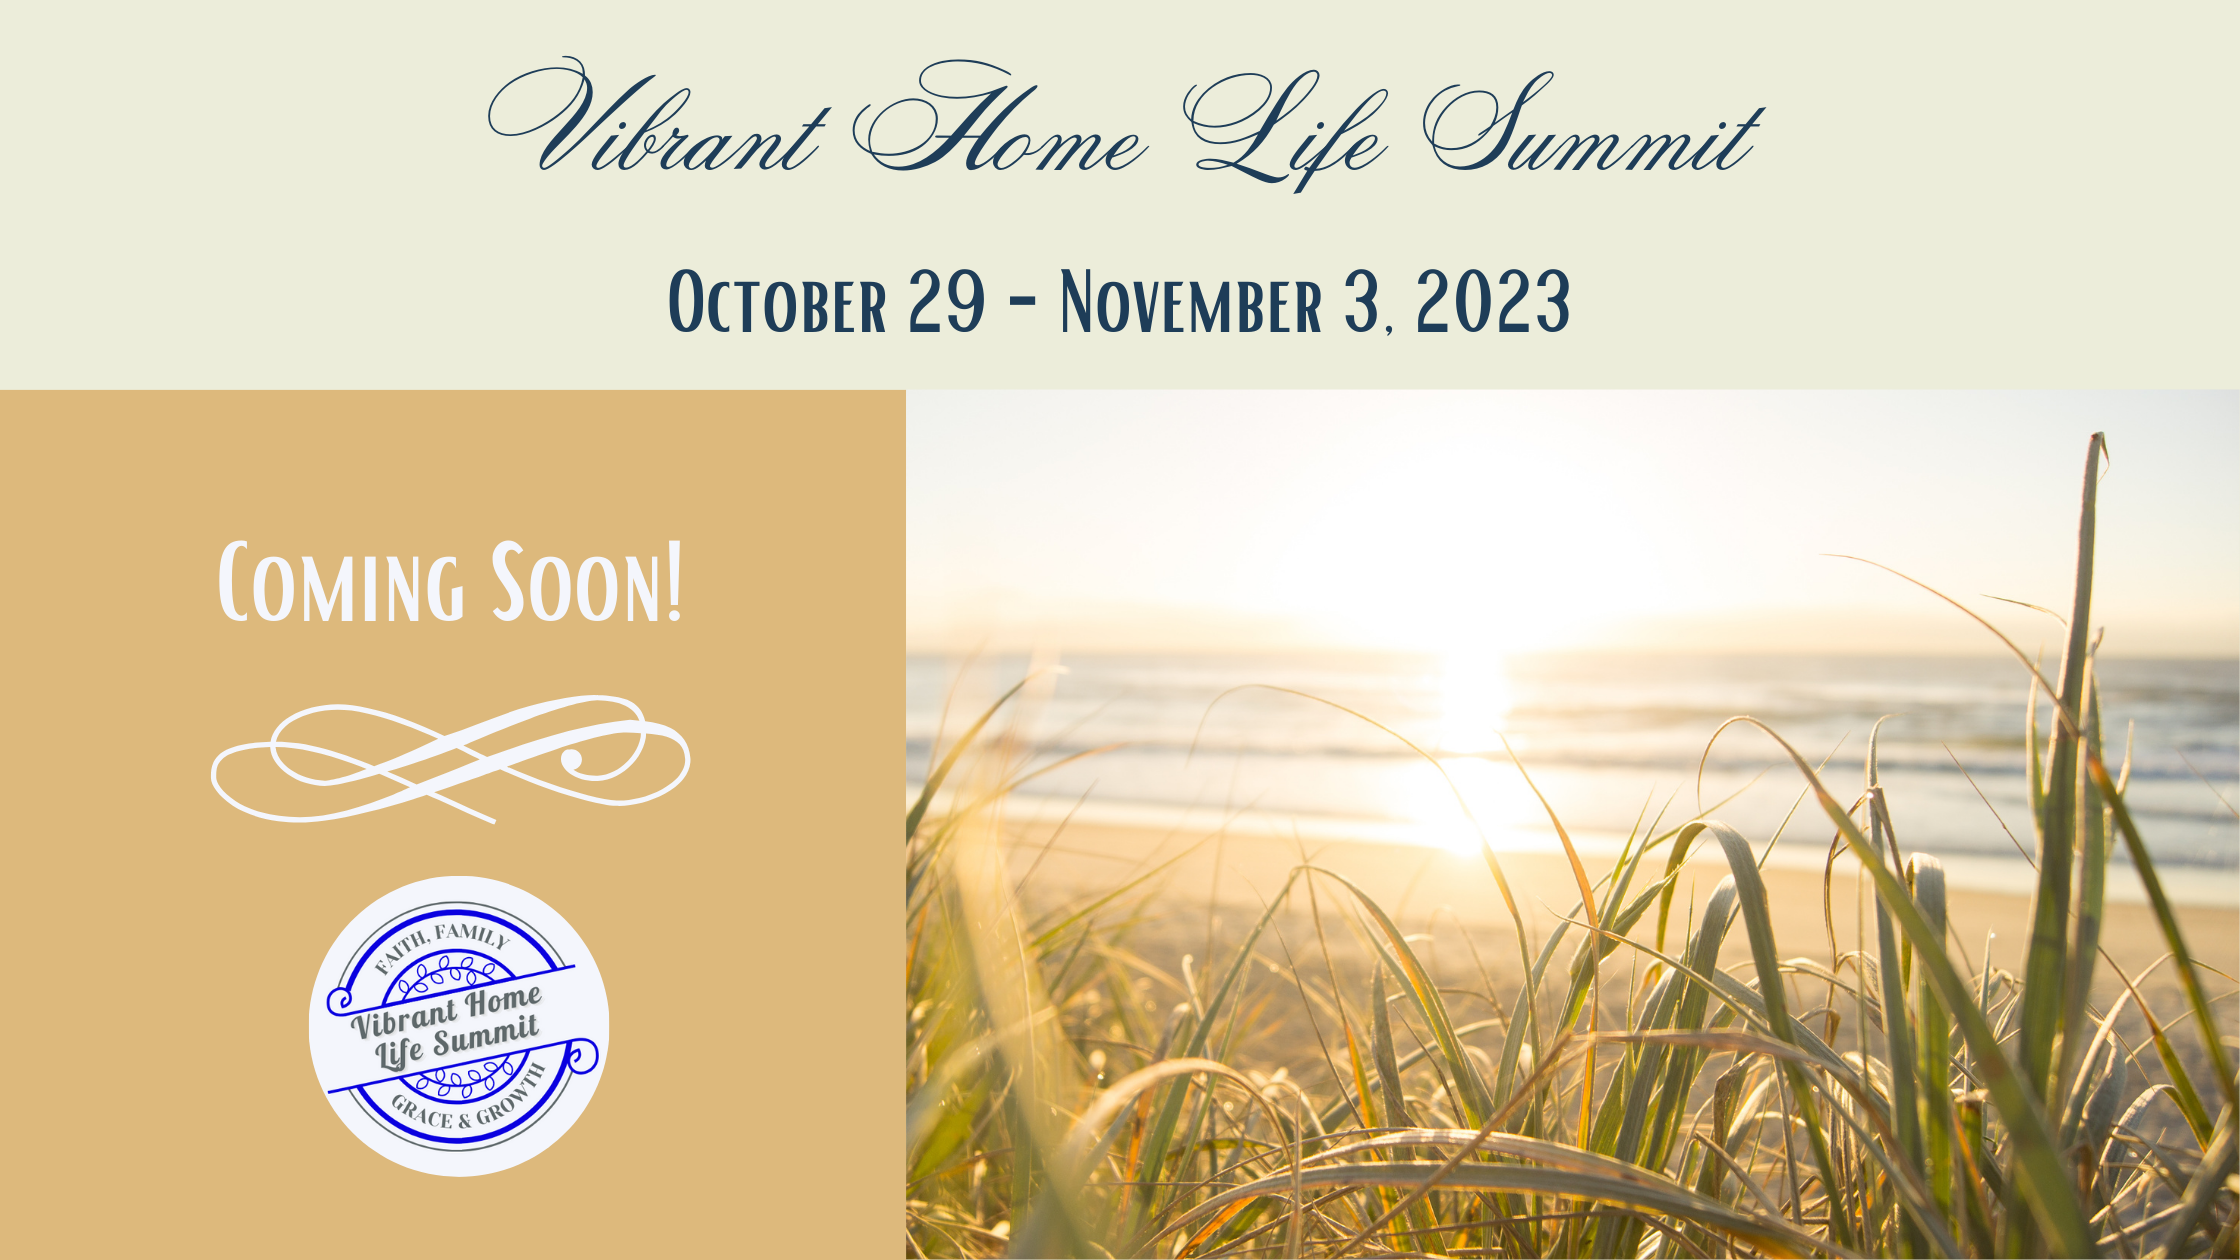 Keeping Faith & Family First at the Vibrant Home Life Summit